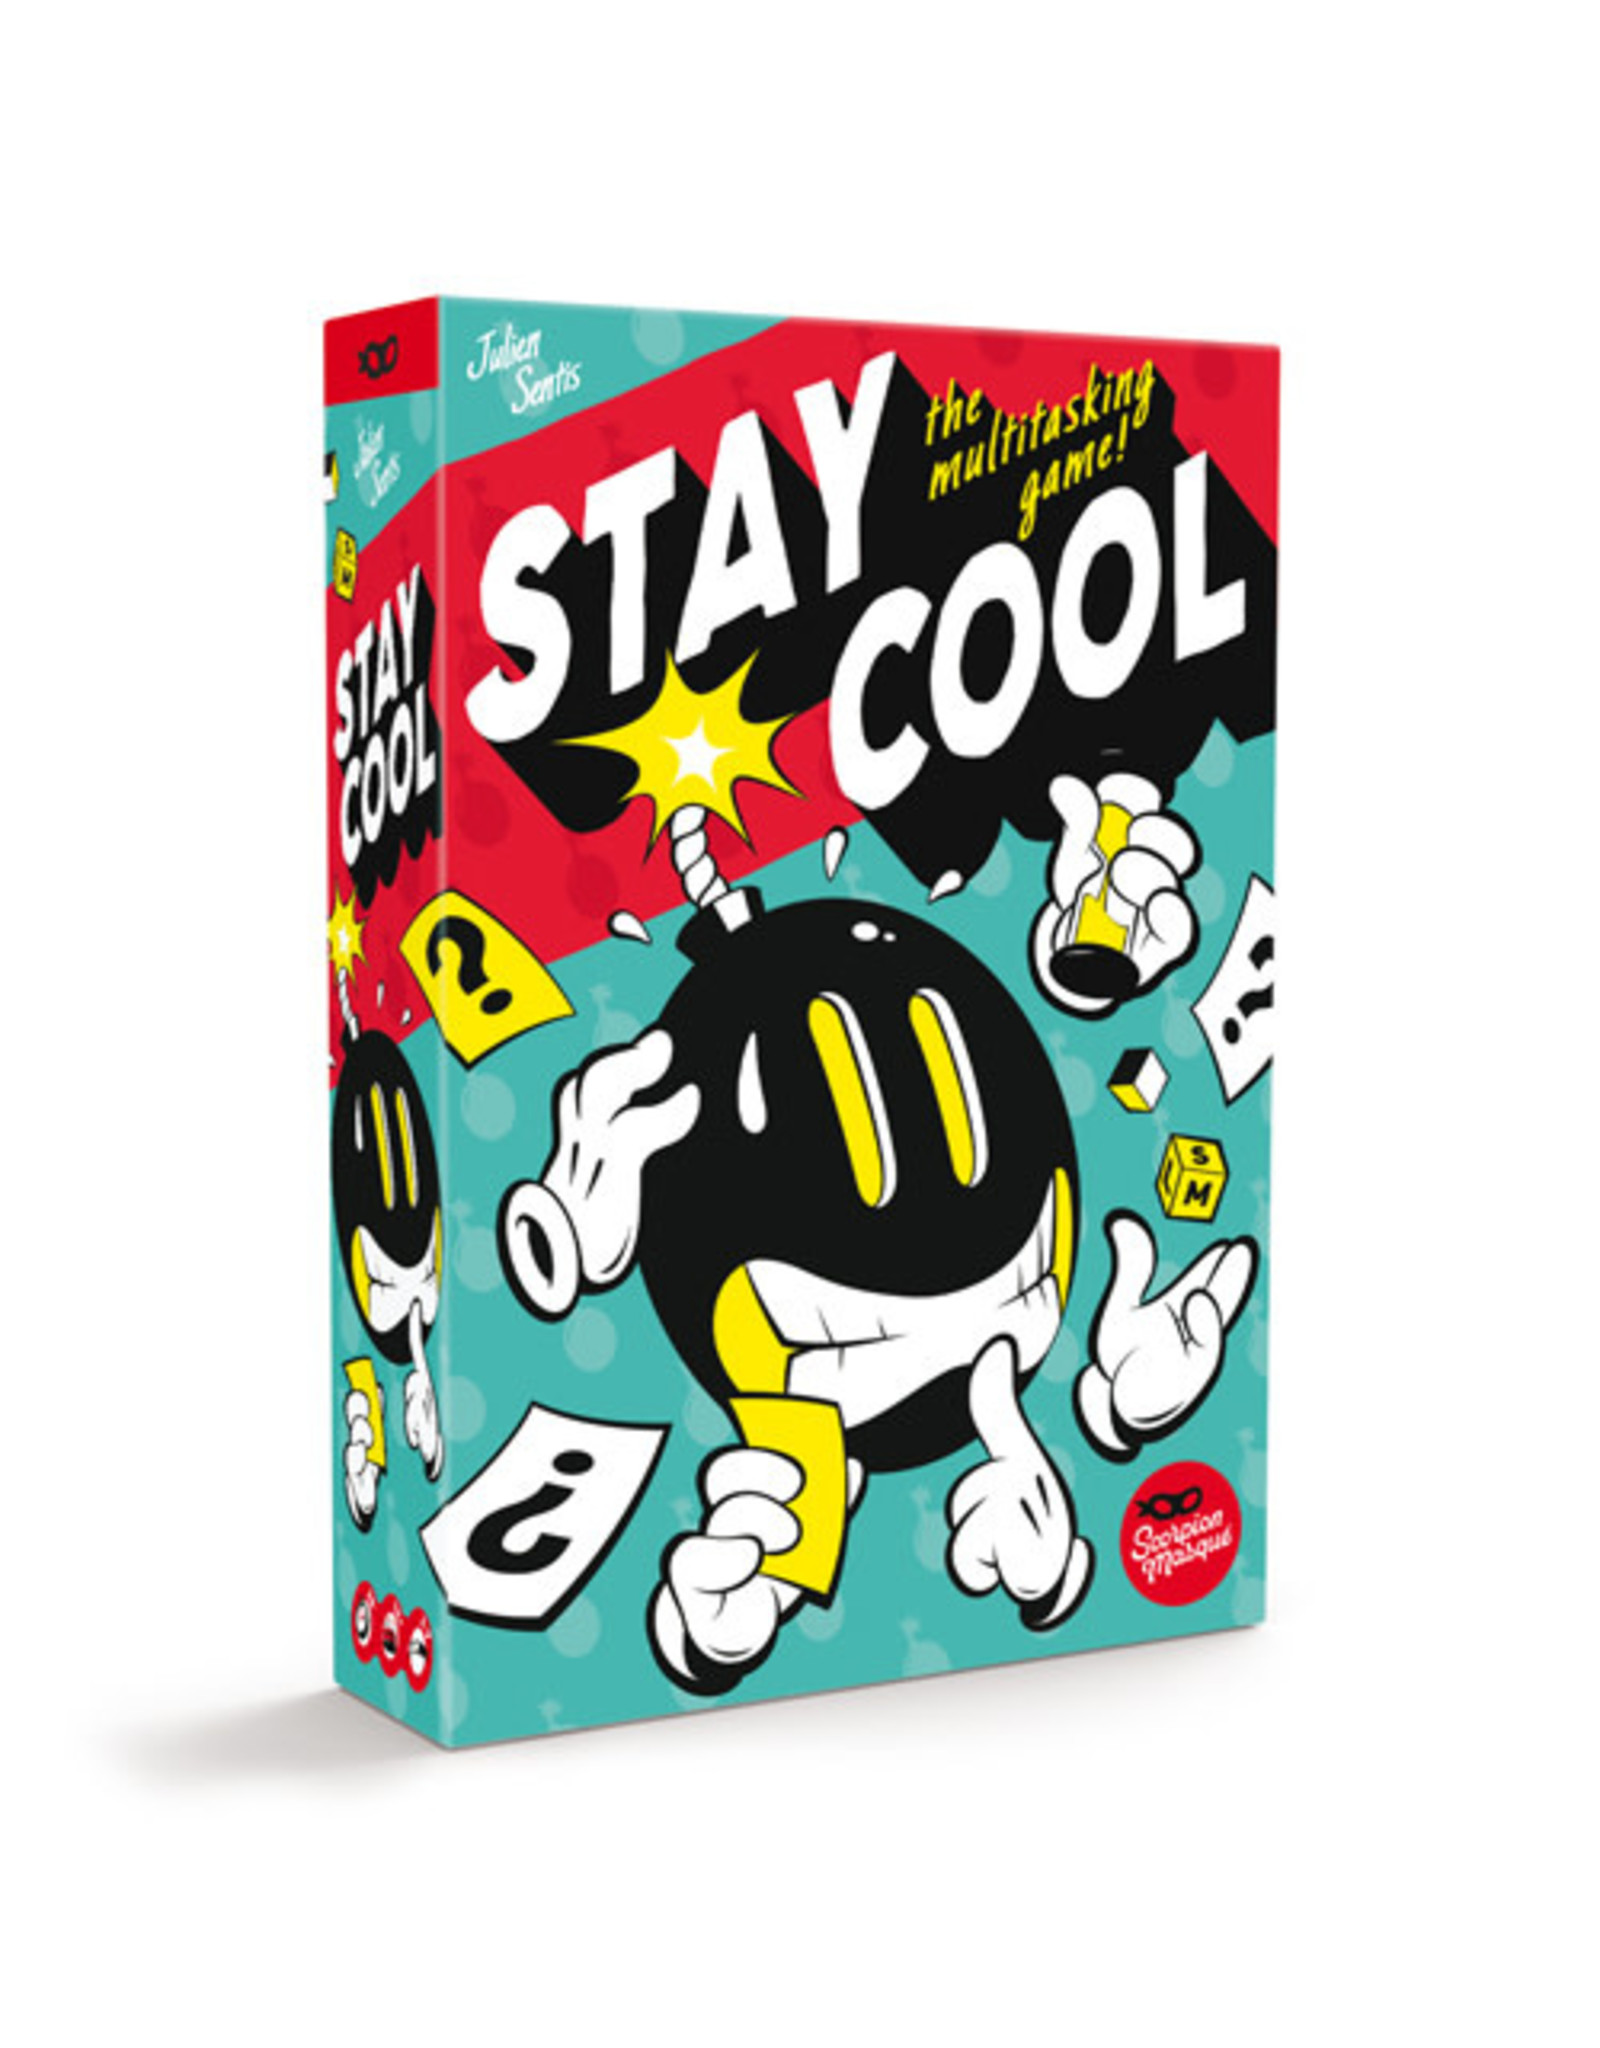 Stay Cool Game the Multitasking Game